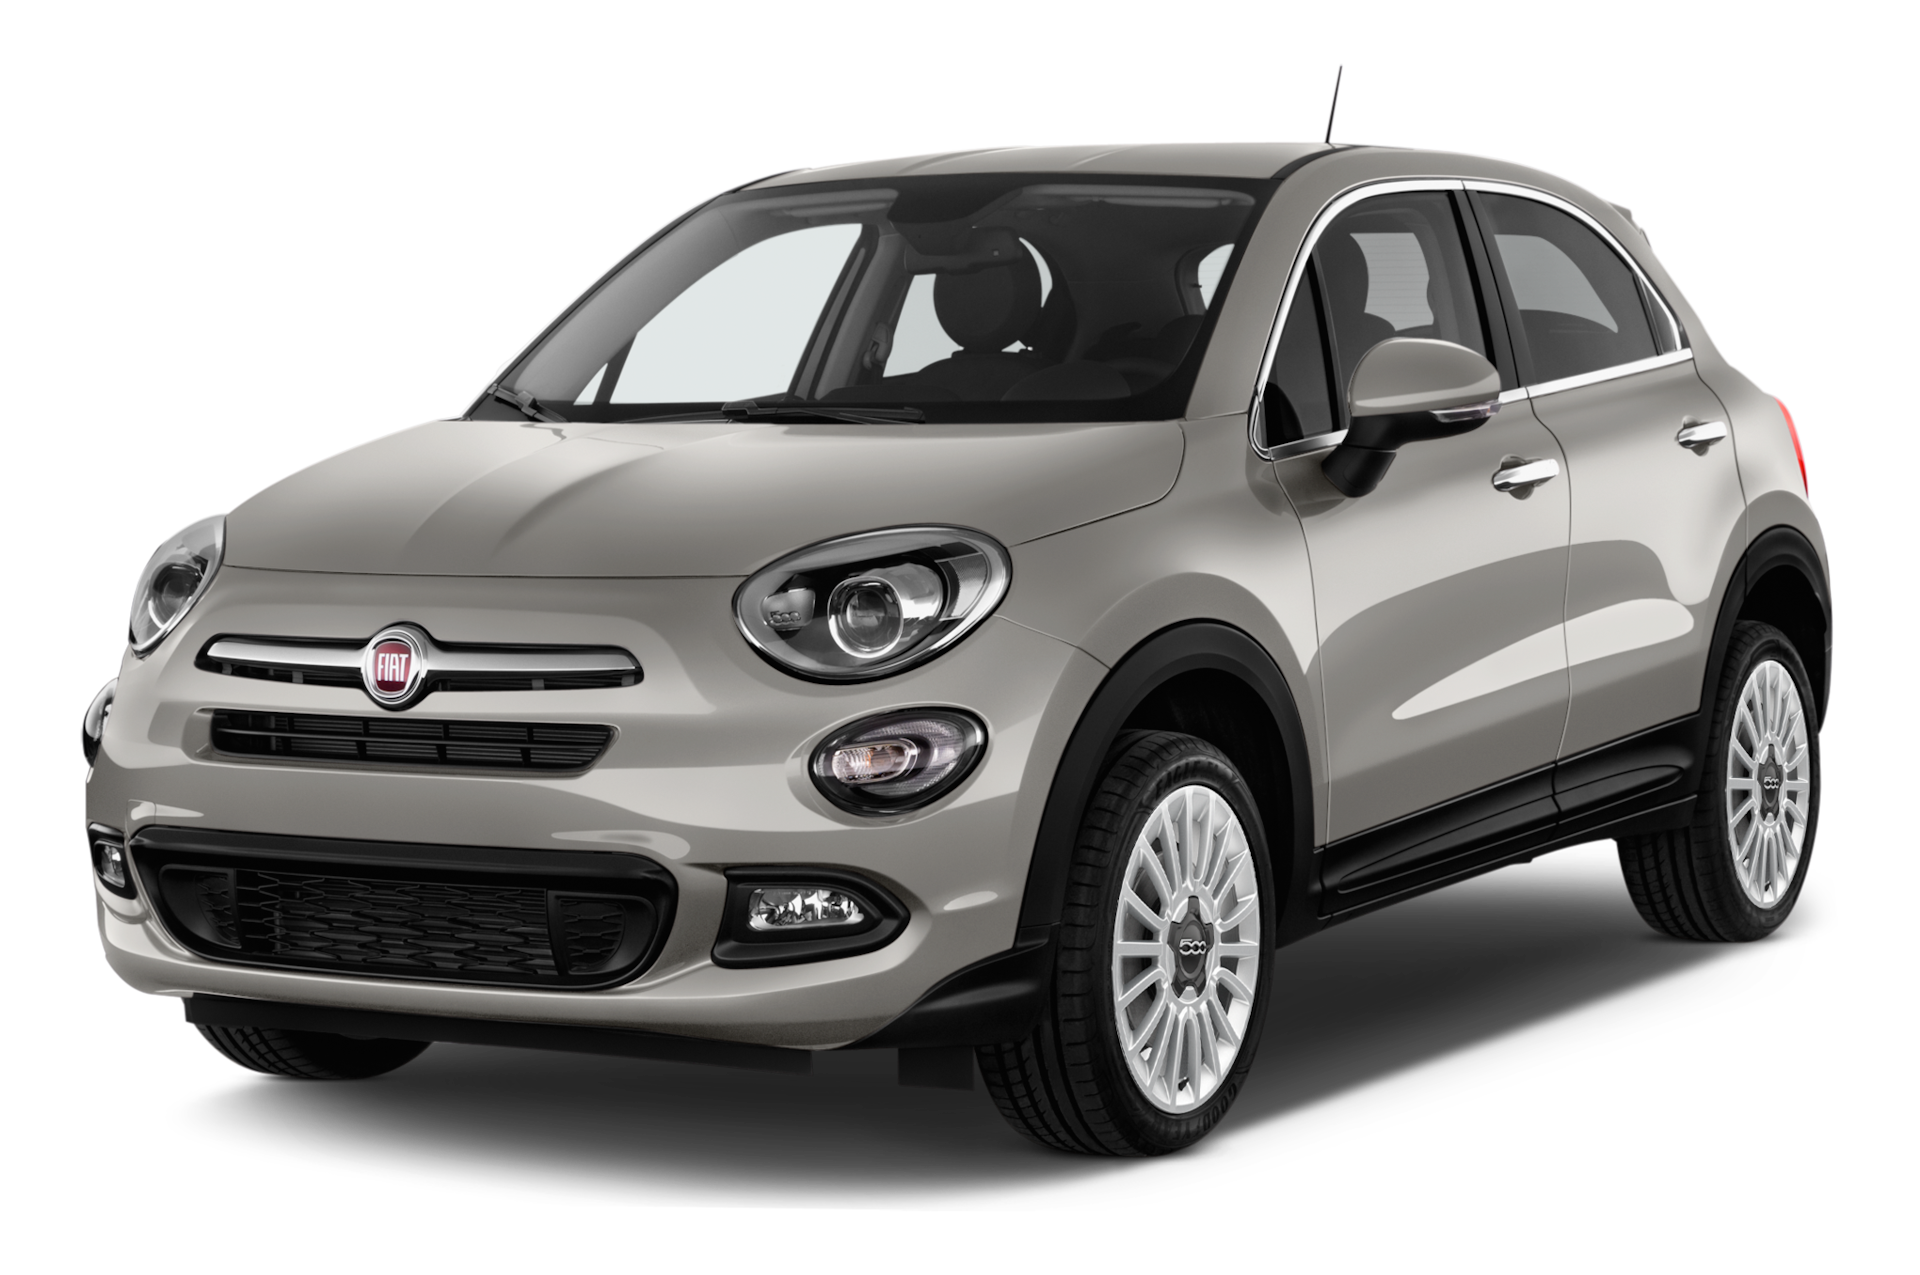 2018 FIAT 500X Prices, Reviews, and Photos - MotorTrend